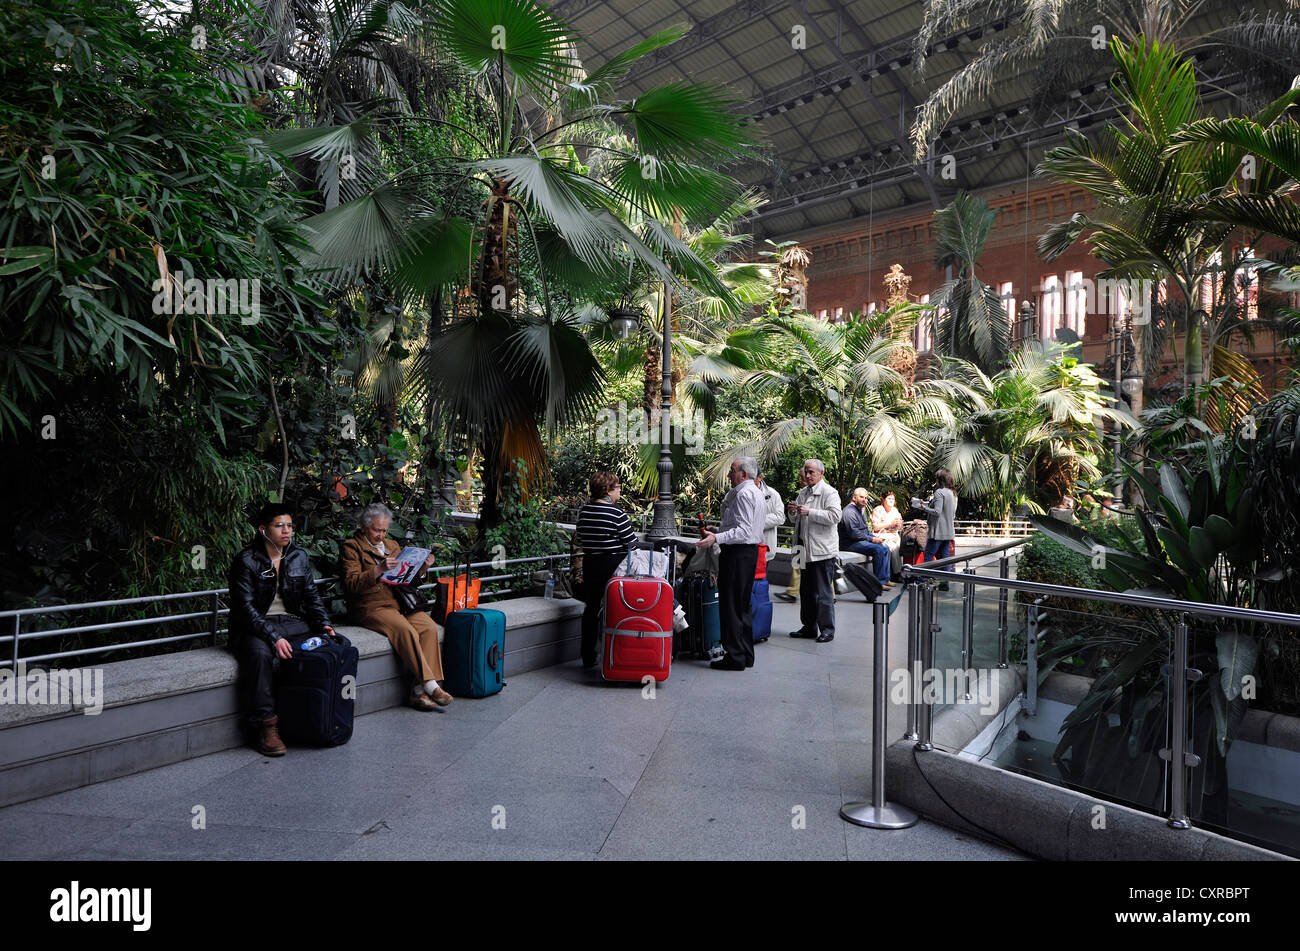 Travellers waiting in the concourse area, redesigned after the so-called 11-M bombings of 11 March 2004 Stock Photo